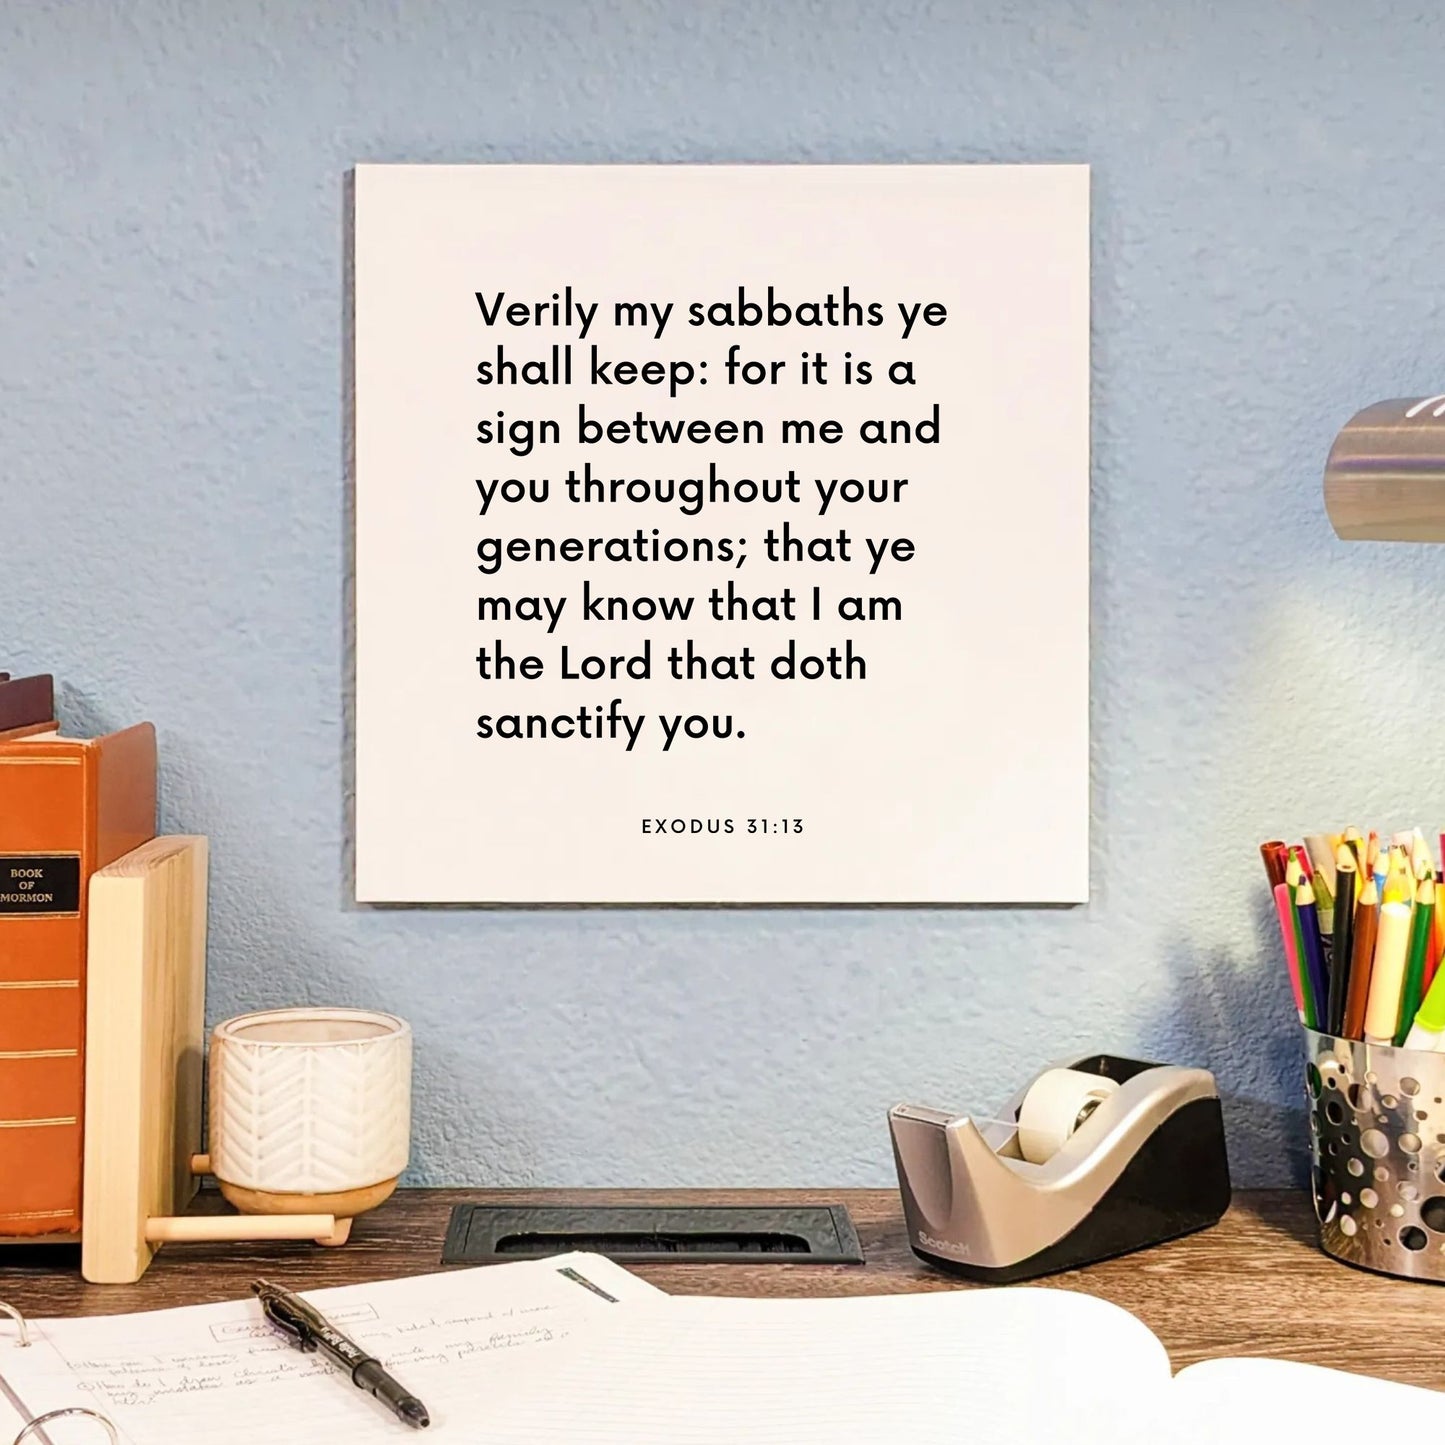 Desk mouting of the scripture tile for Exodus 31:13 - "Verily my sabbaths ye shall keep"